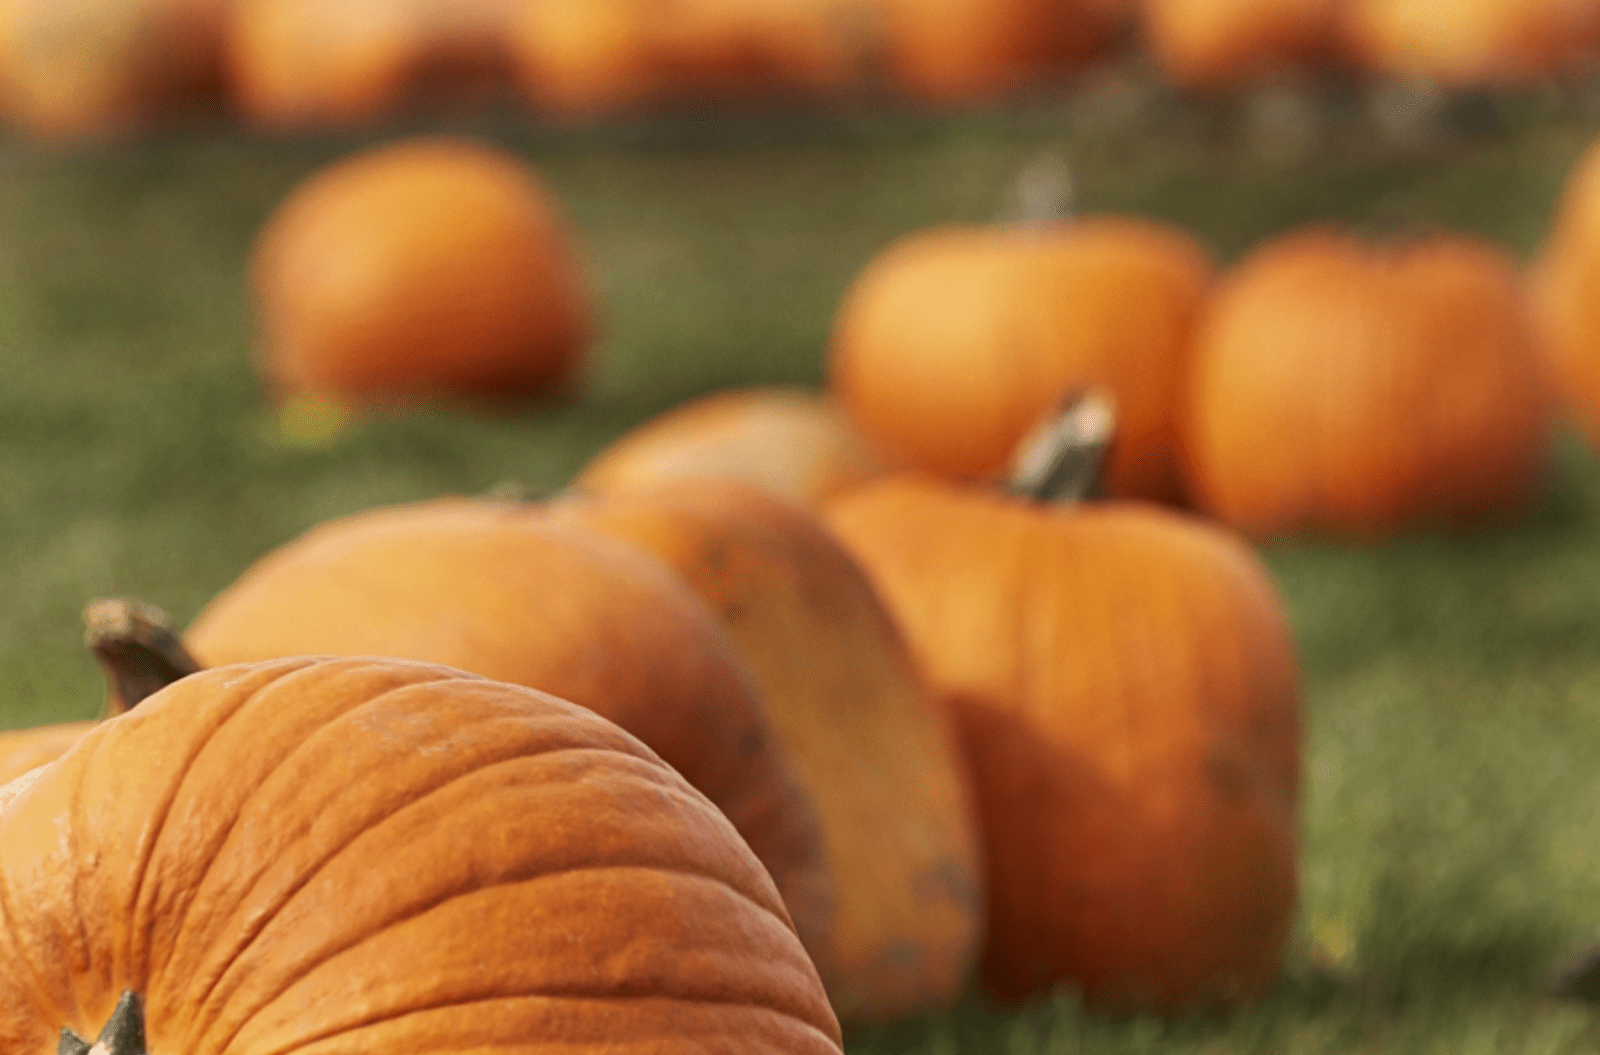 The best places to go pumpkin picking near Manchester this Halloween, The Manc